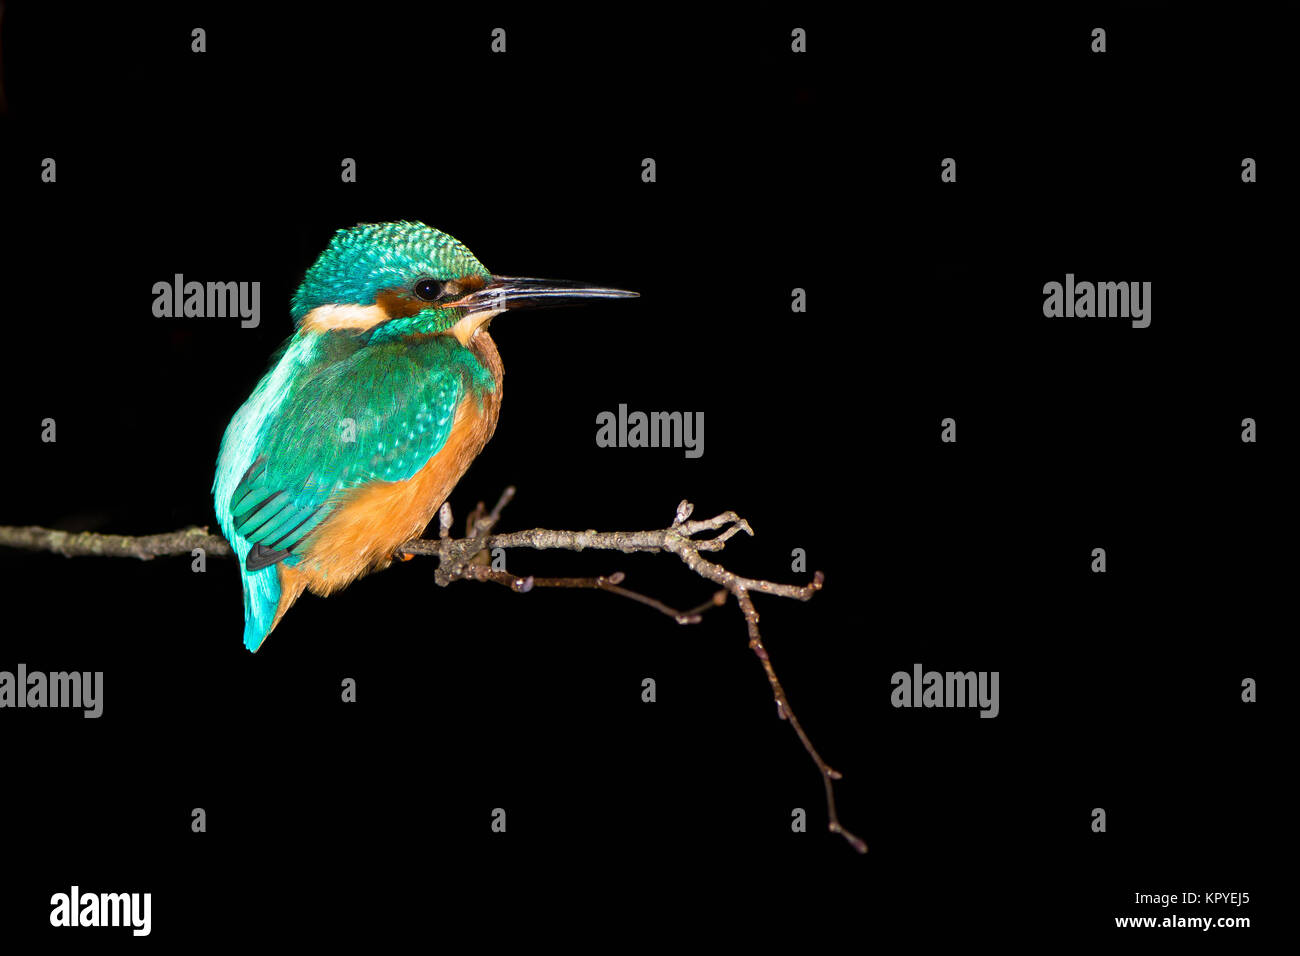 Kingfisher (Alcedo atthis) perched at night. Common kingfisher in the family Alcedinidae at rest on tree on river bank, in profile Stock Photo